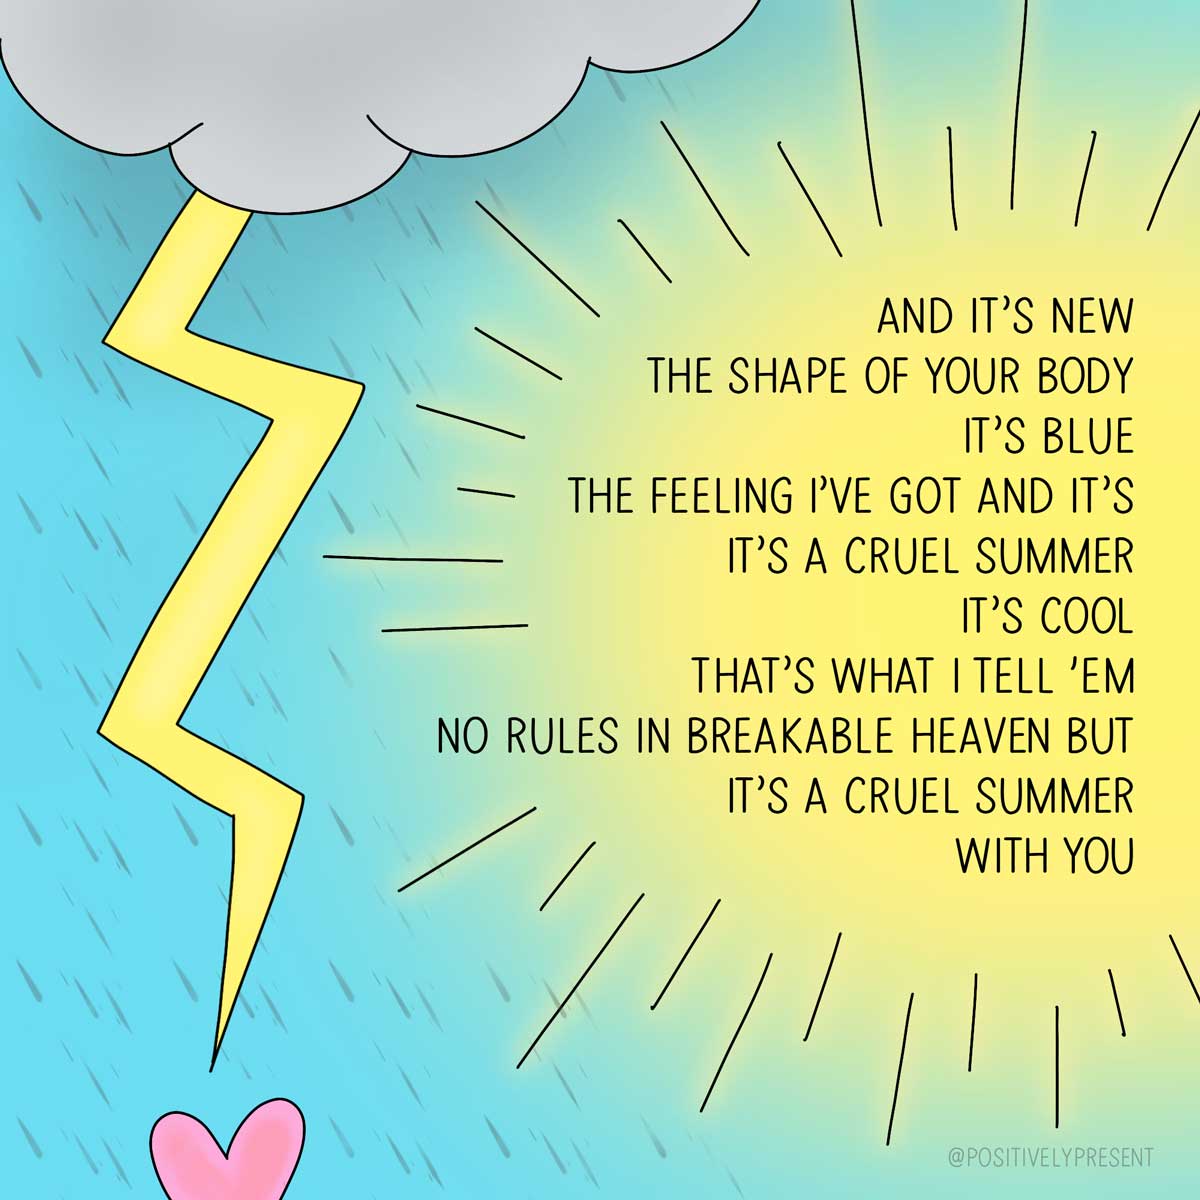 quote from song cruel summer by taylor swift on thunderstorm artwork.